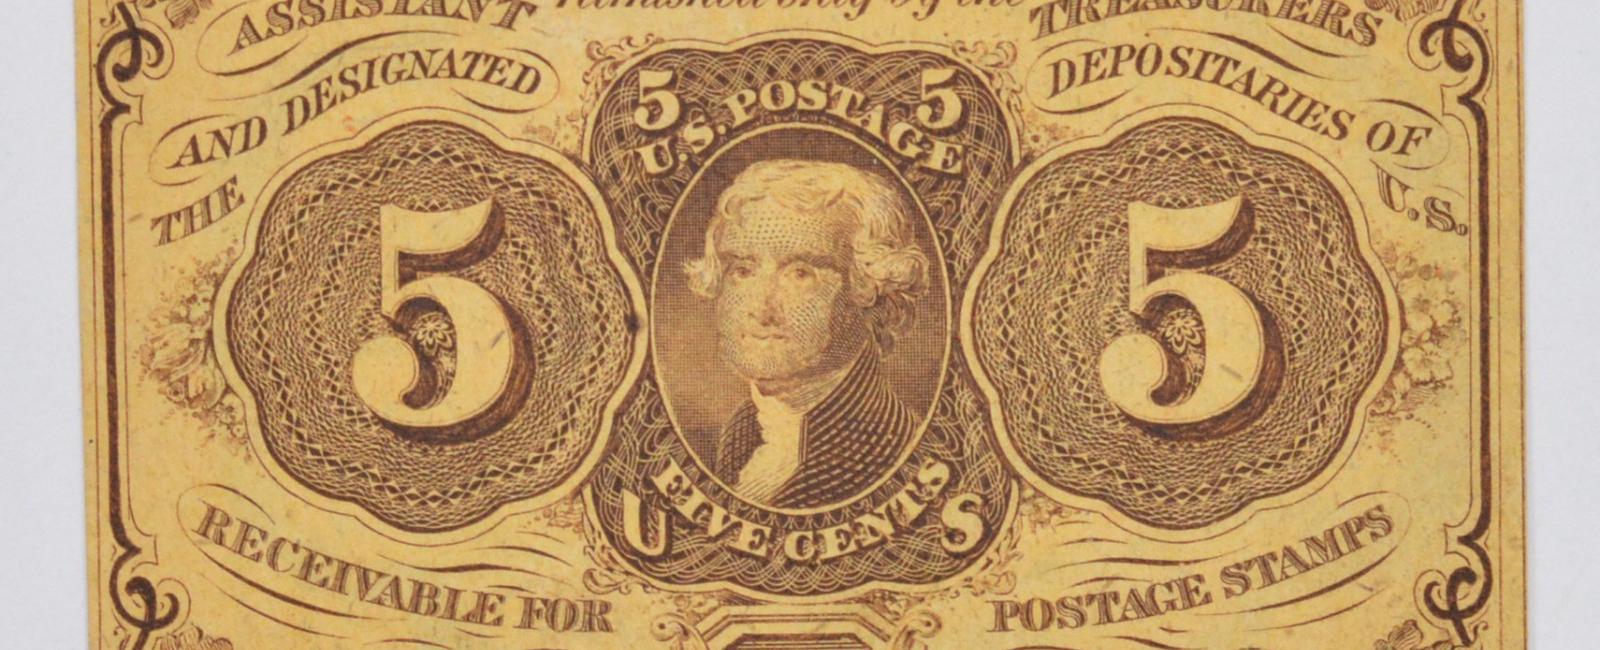 America once issued a 5 cent bill